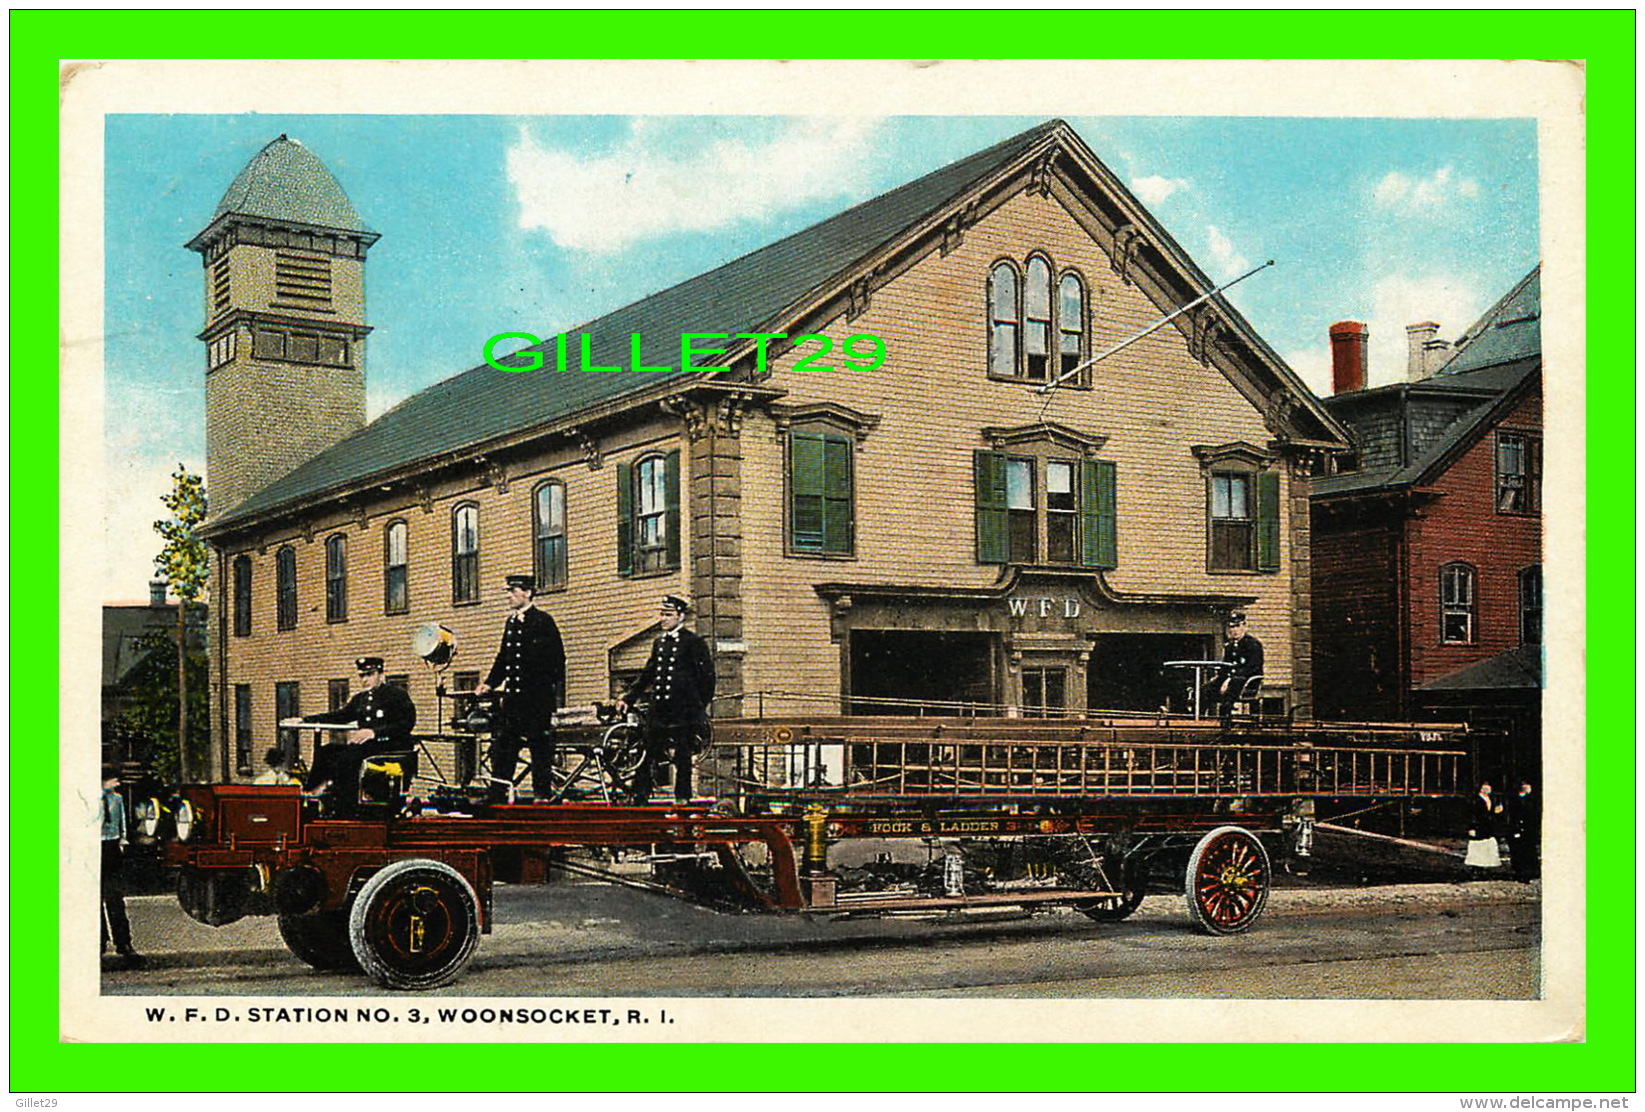 WOONSOCKET, RI - FIRE TRUCK HOOK & LADDER AT W. F. D. STATION No 3 - ANIMATED - TRAVEL - C. T. AMERICAN ART - - Woonsocket